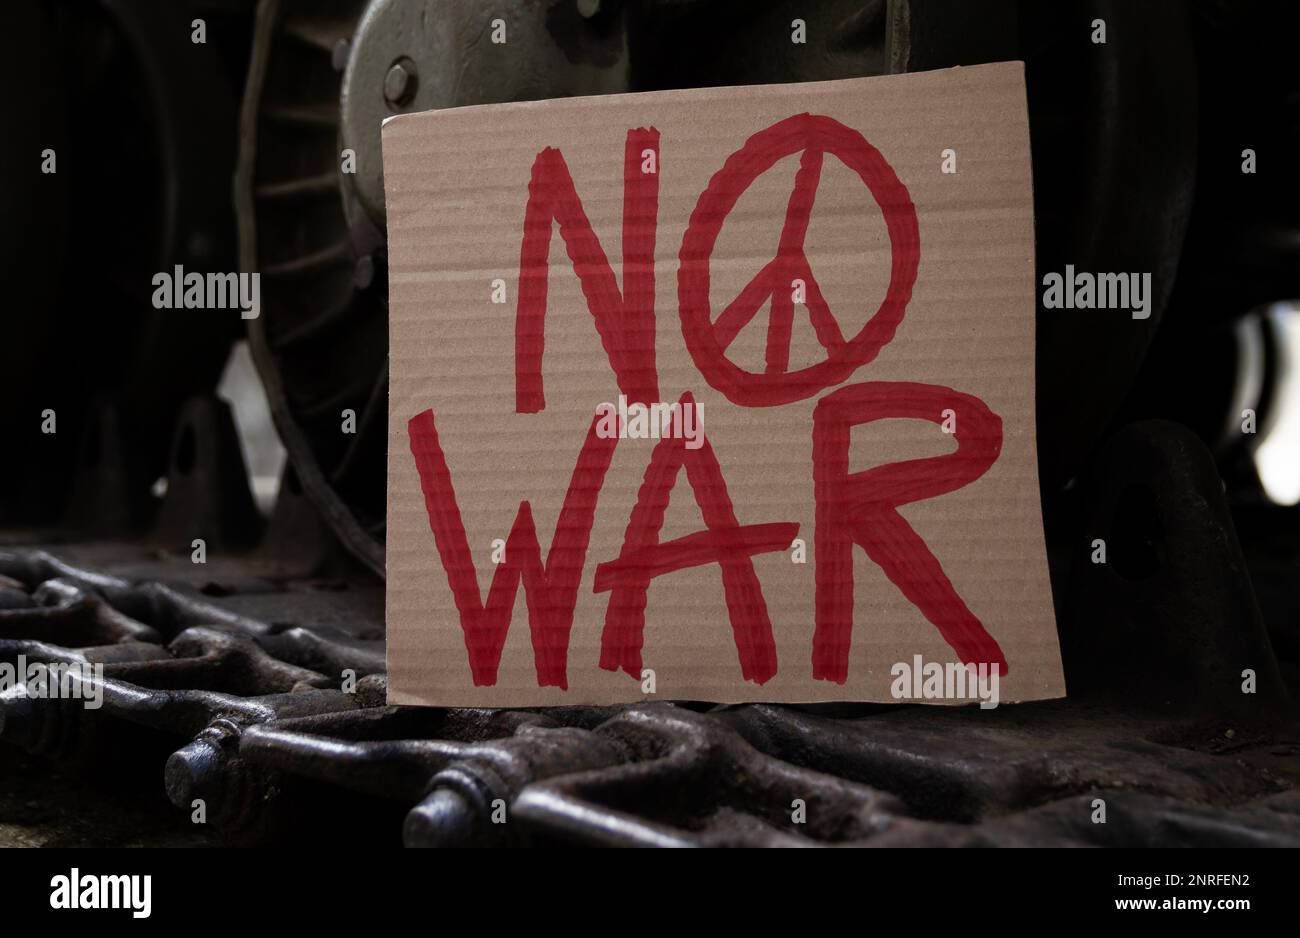 No War placard with peace sign on army tank caterpillar continuous track wheels. Military armored tracked fighting vehicle with anti-war banner. Stock Photo